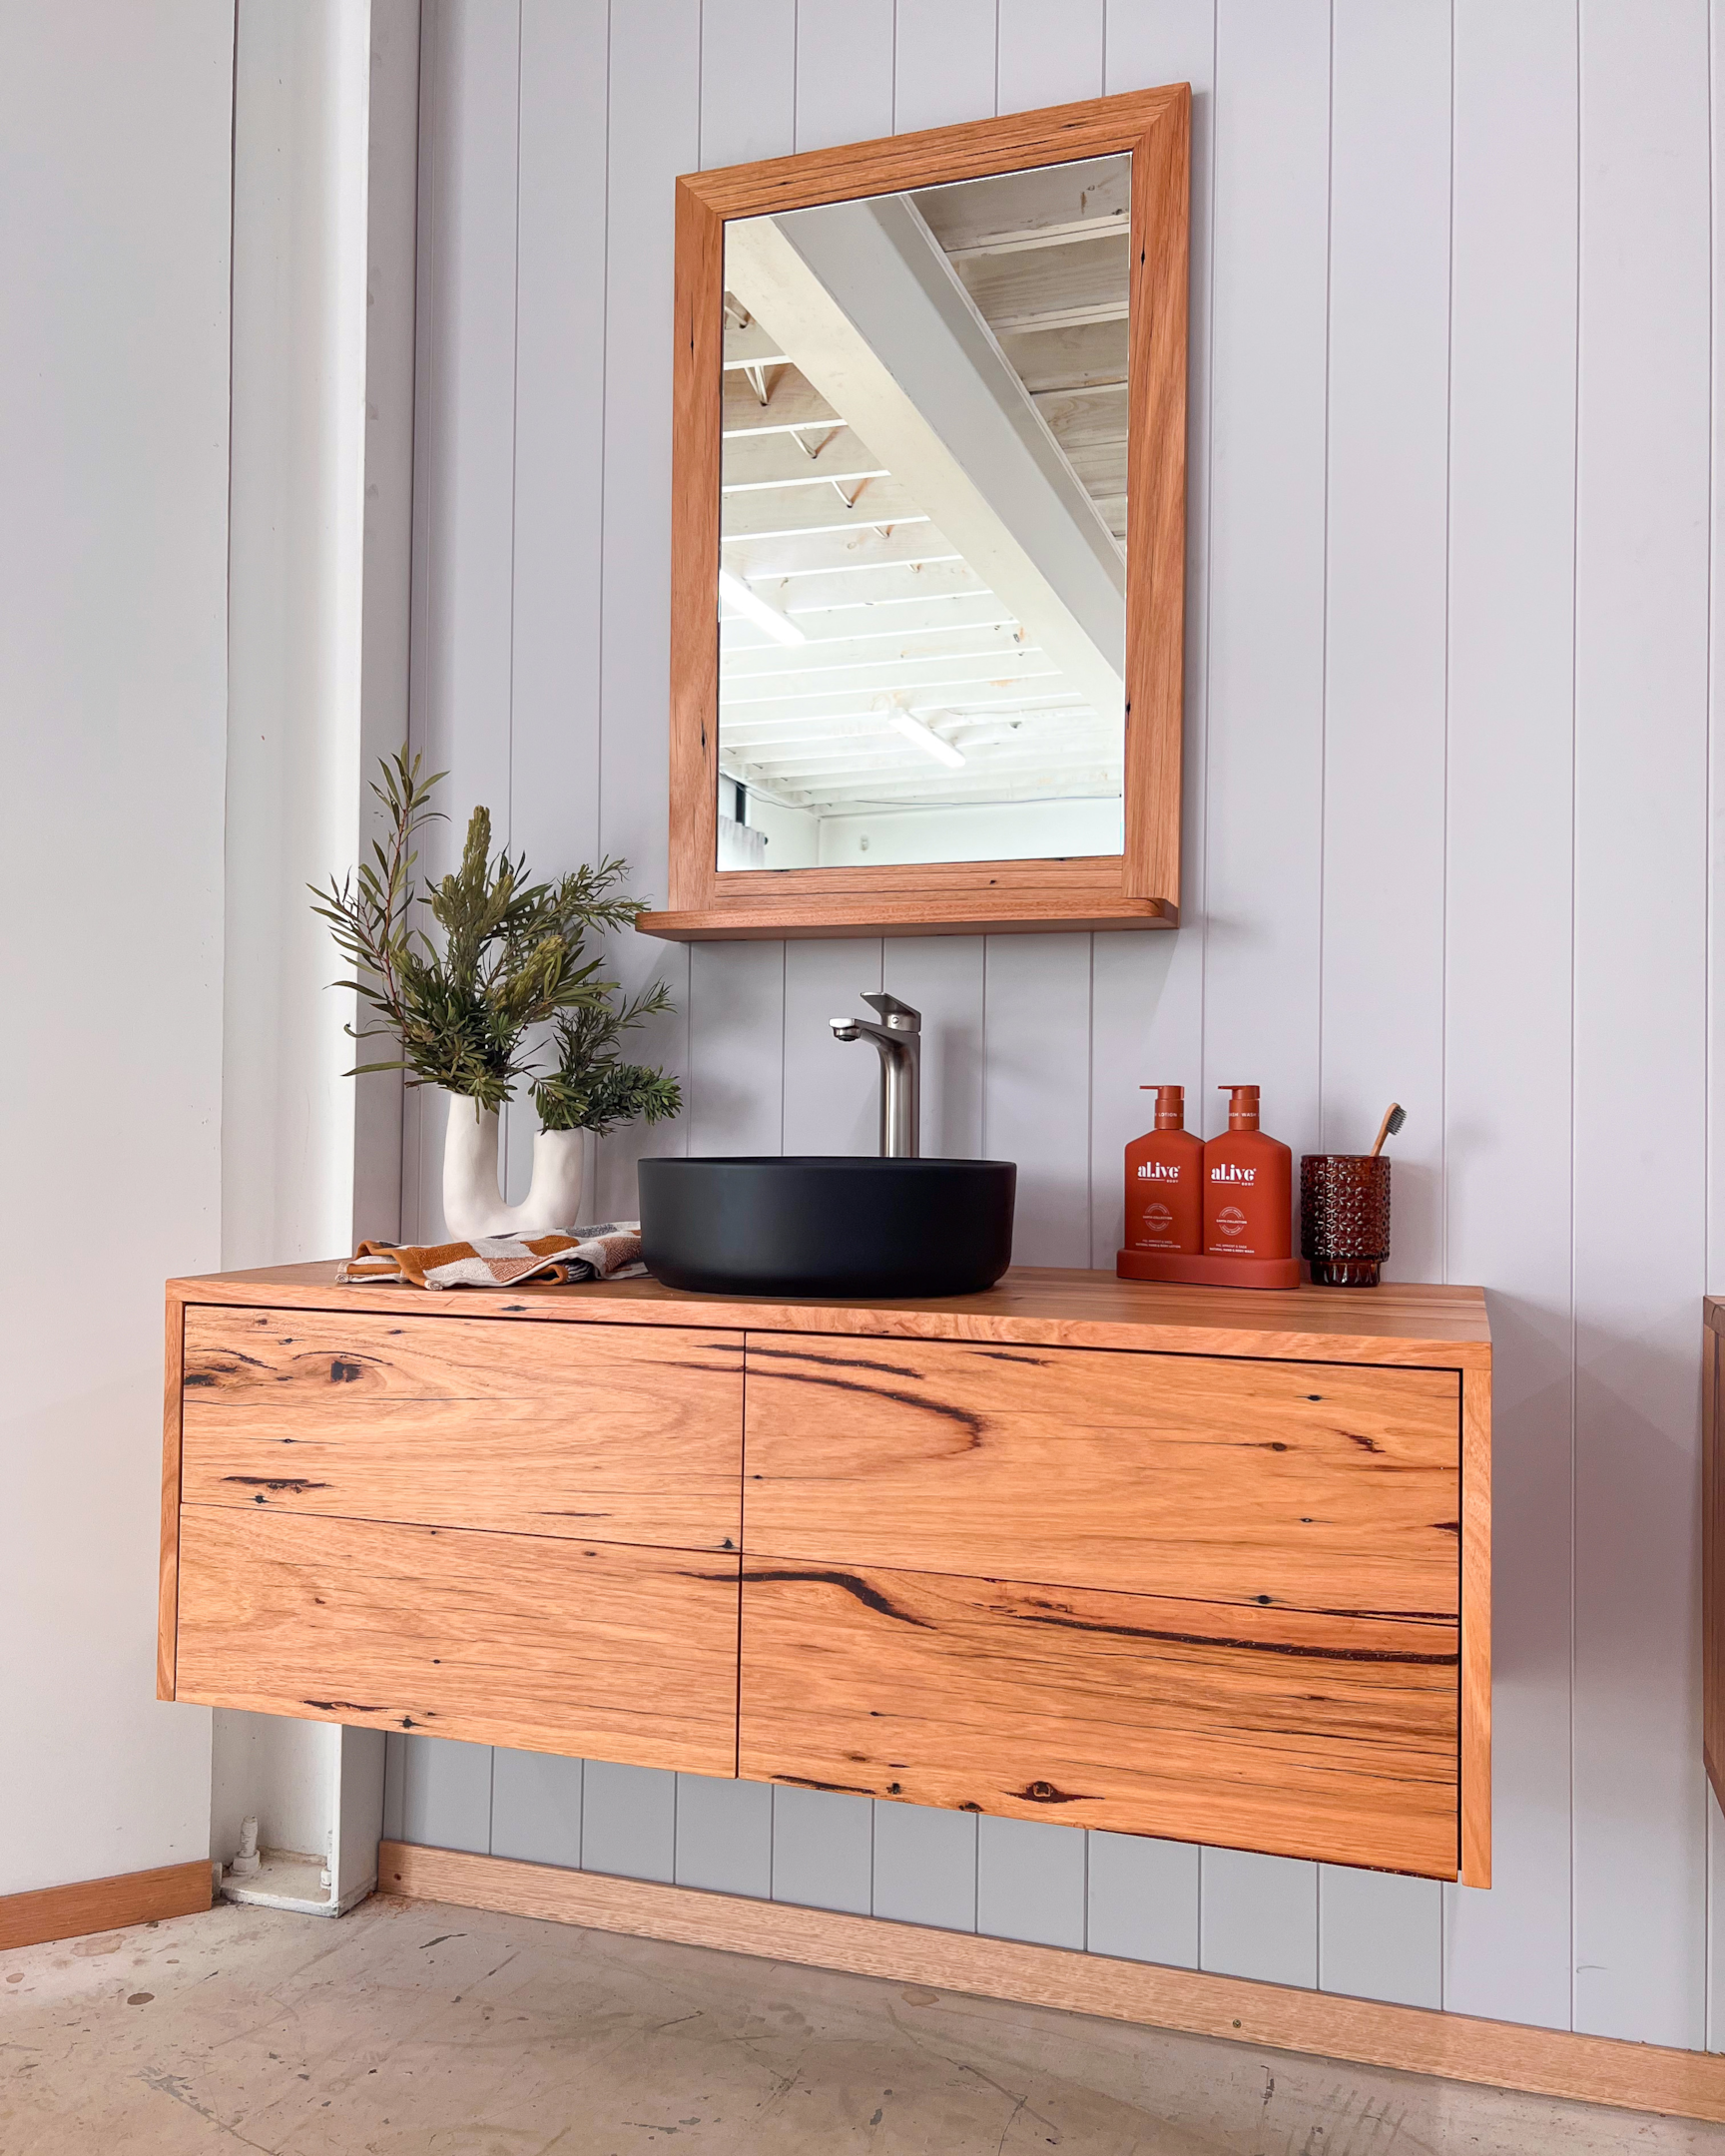 A small bathroom with a floating vanity, creating the illusion of more space